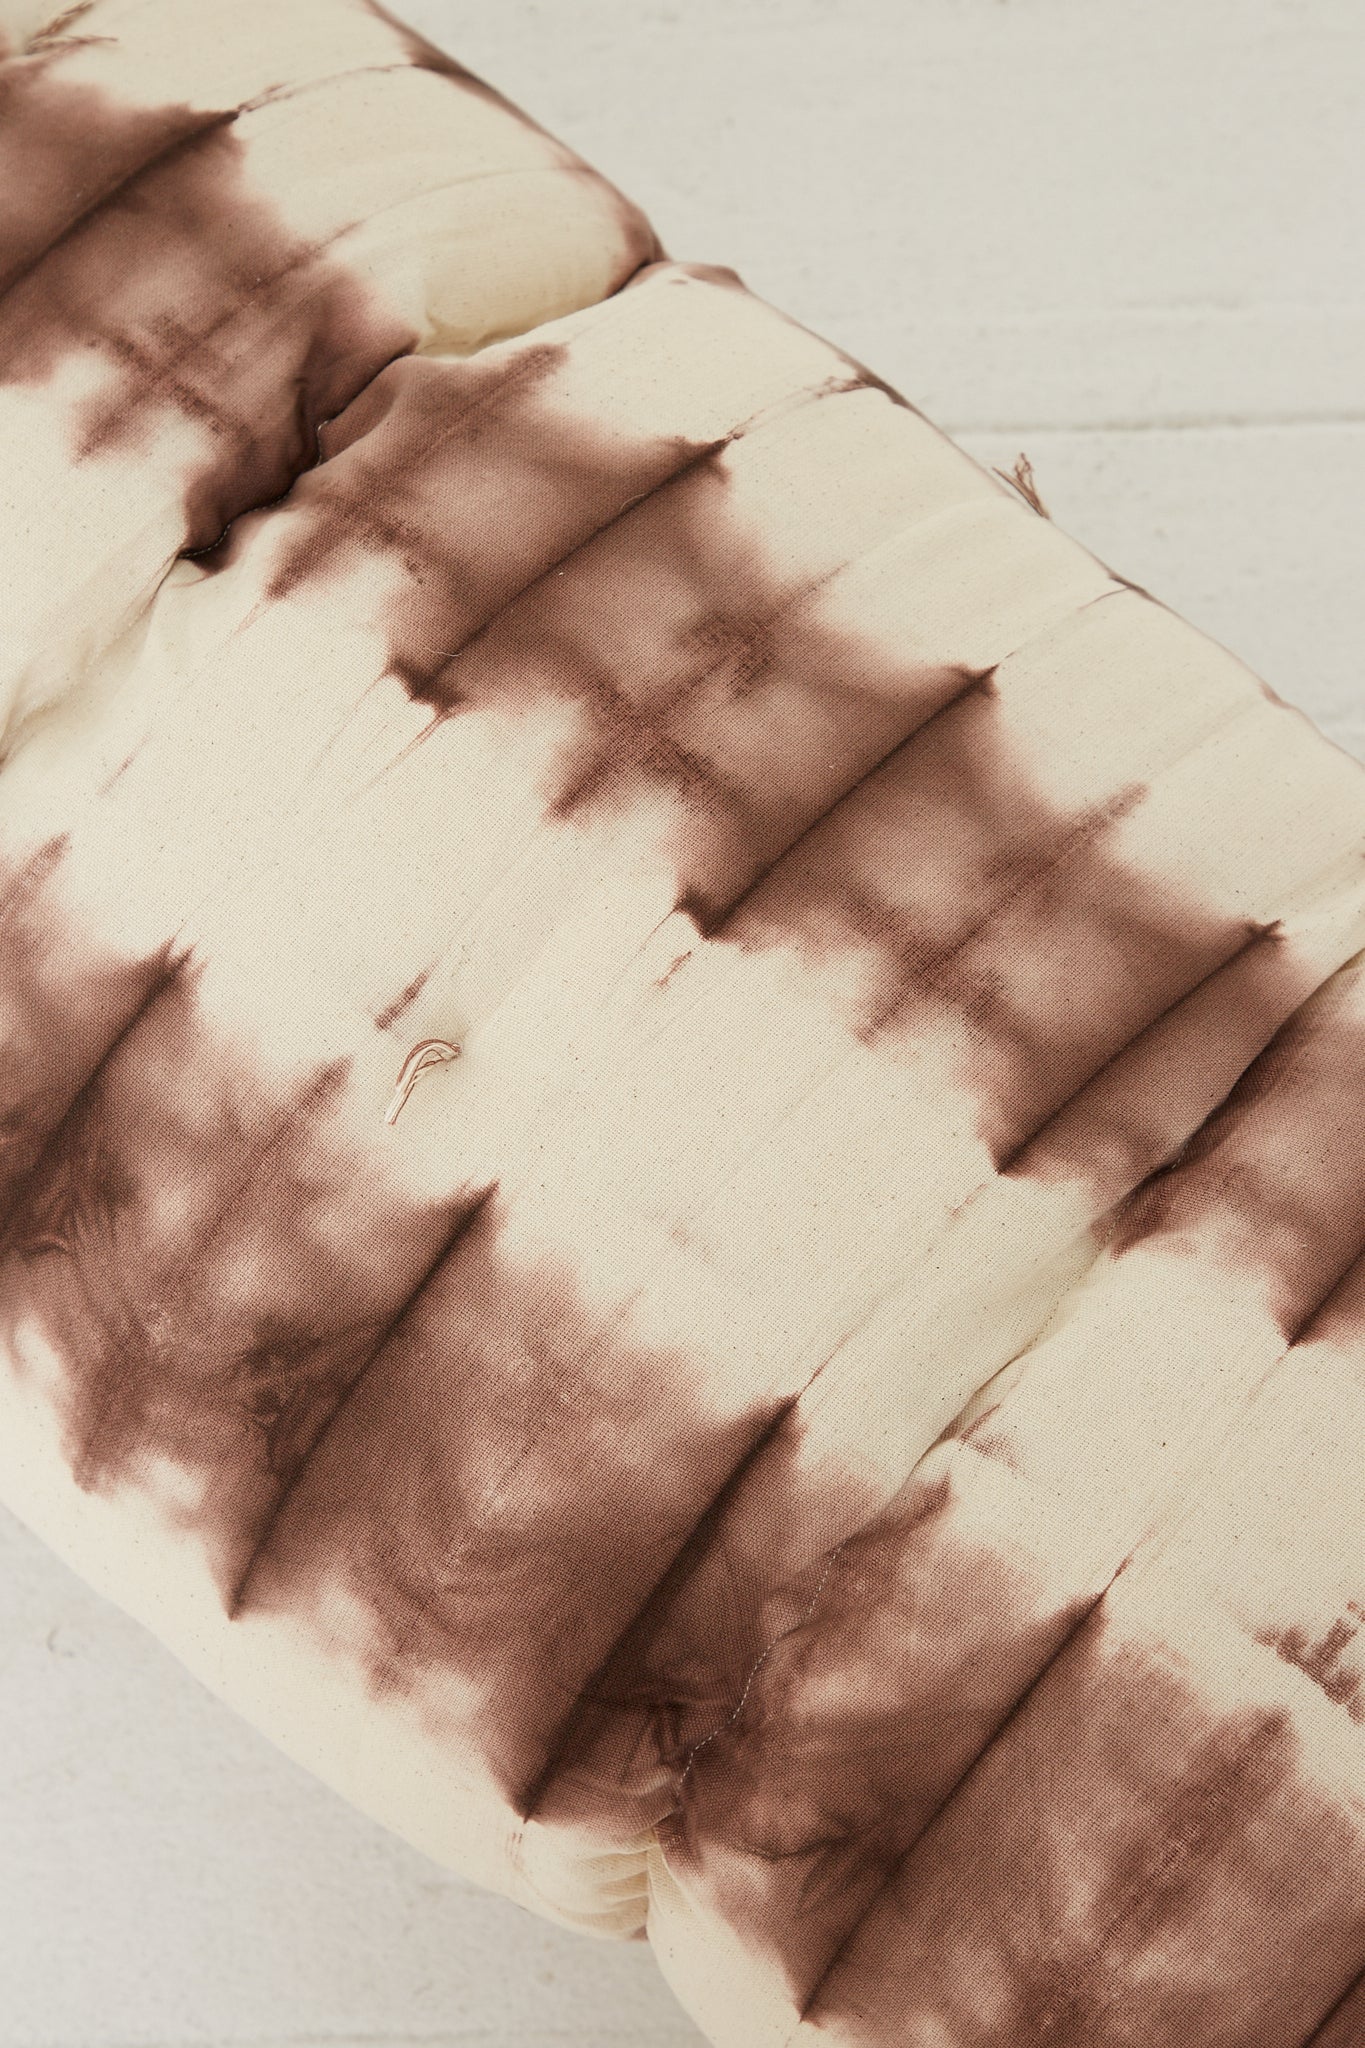 A Tufted Overlay Mattress in Chocolate Tie Dye by Tensira.